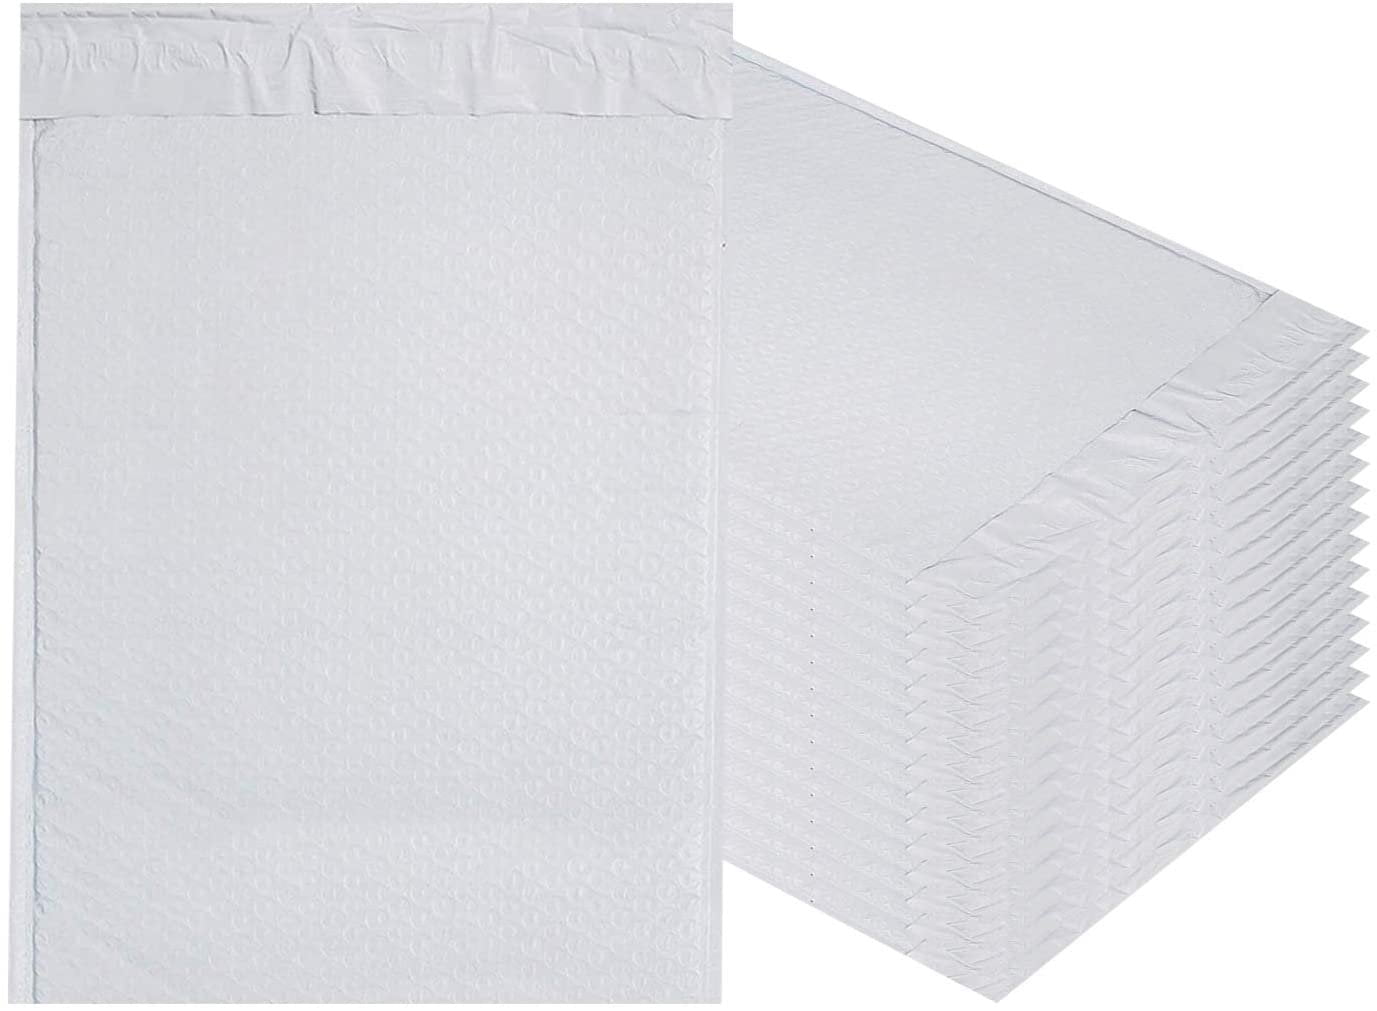 5x7 White Poly Mailer Bubble Mailers Padded Envelopes Self Sealing Waterproof 